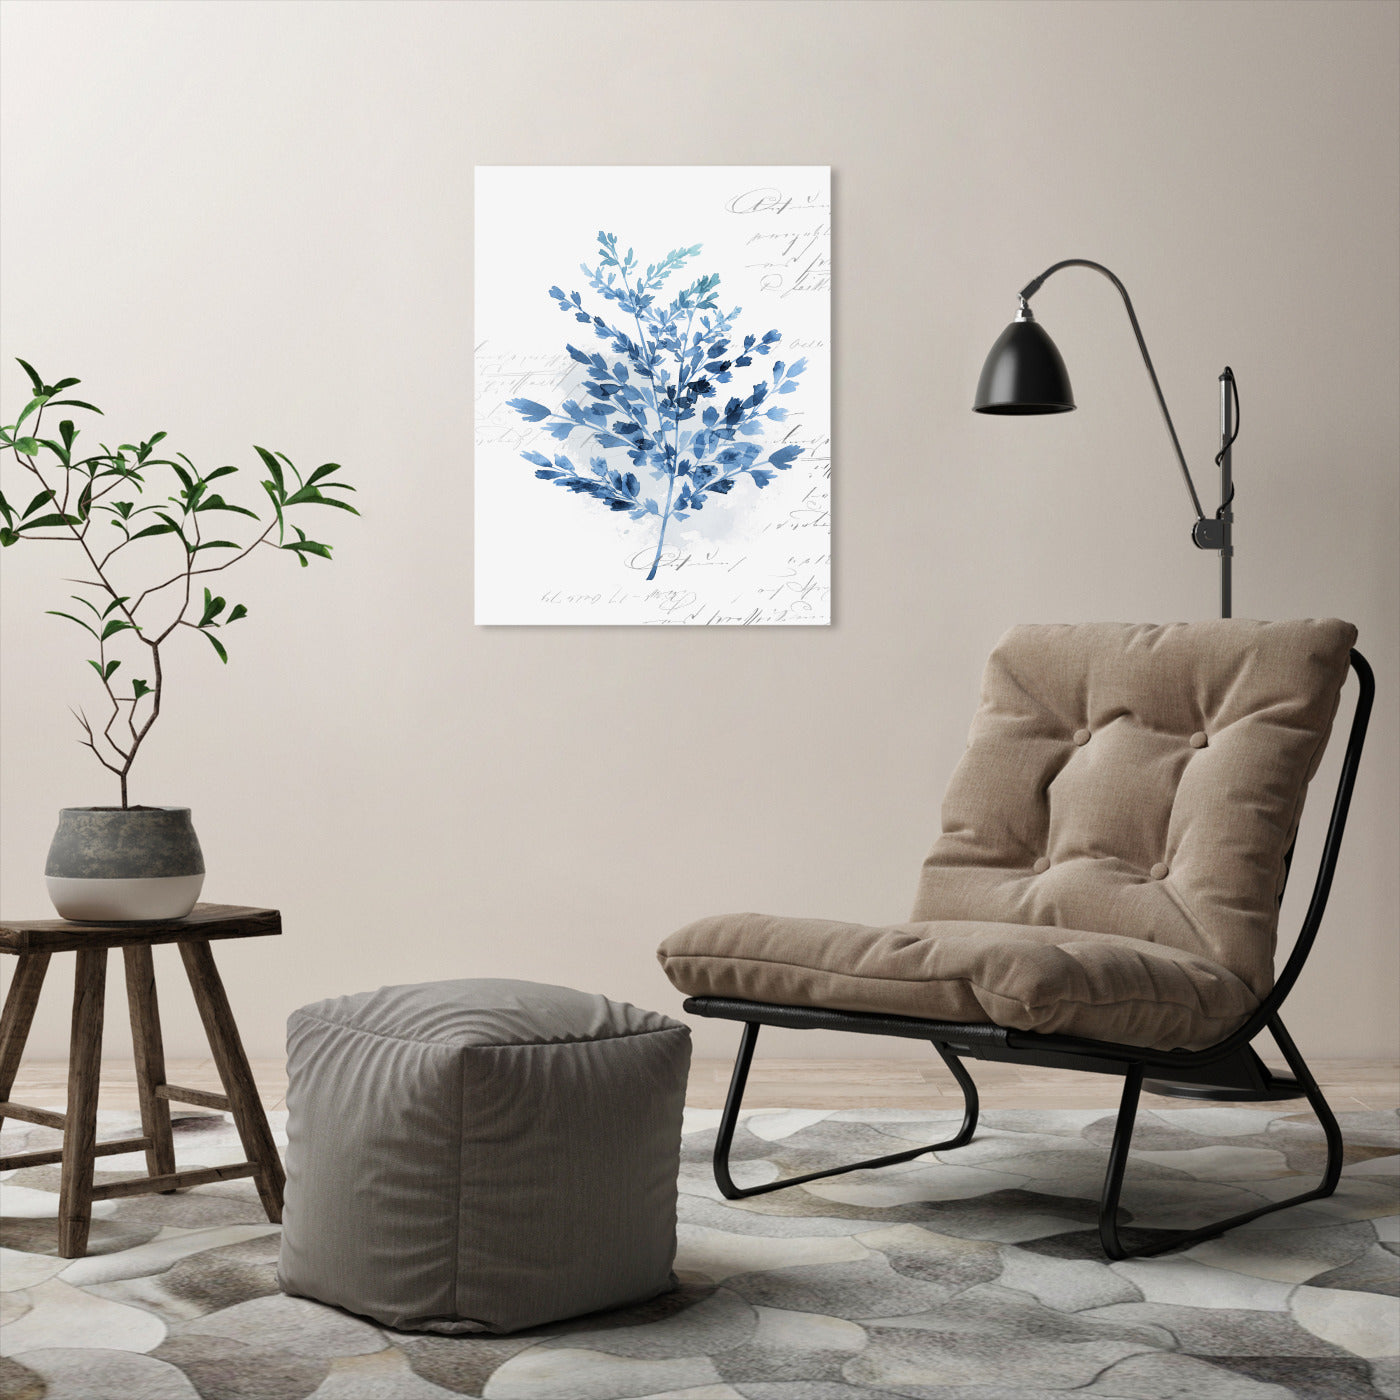 Botanical Blue Iii by PI Creative Art - Wrapped Canvas - Americanflat